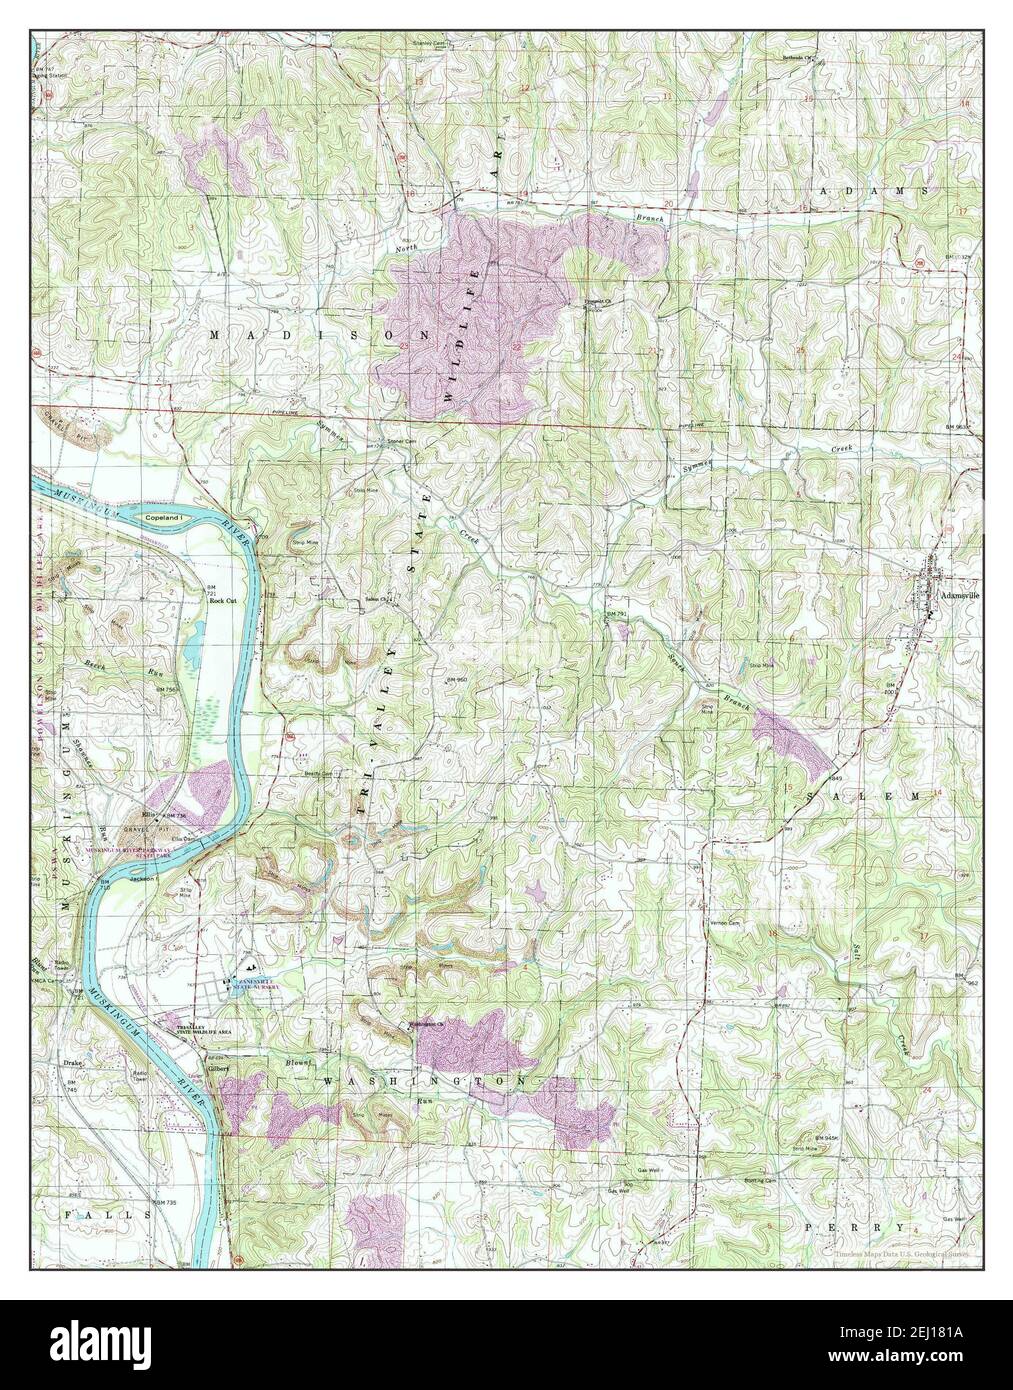 Adamsville, Ohio, map 1994, 1:24000, United States of America by Timeless Maps, data U.S. Geological Survey Stock Photo